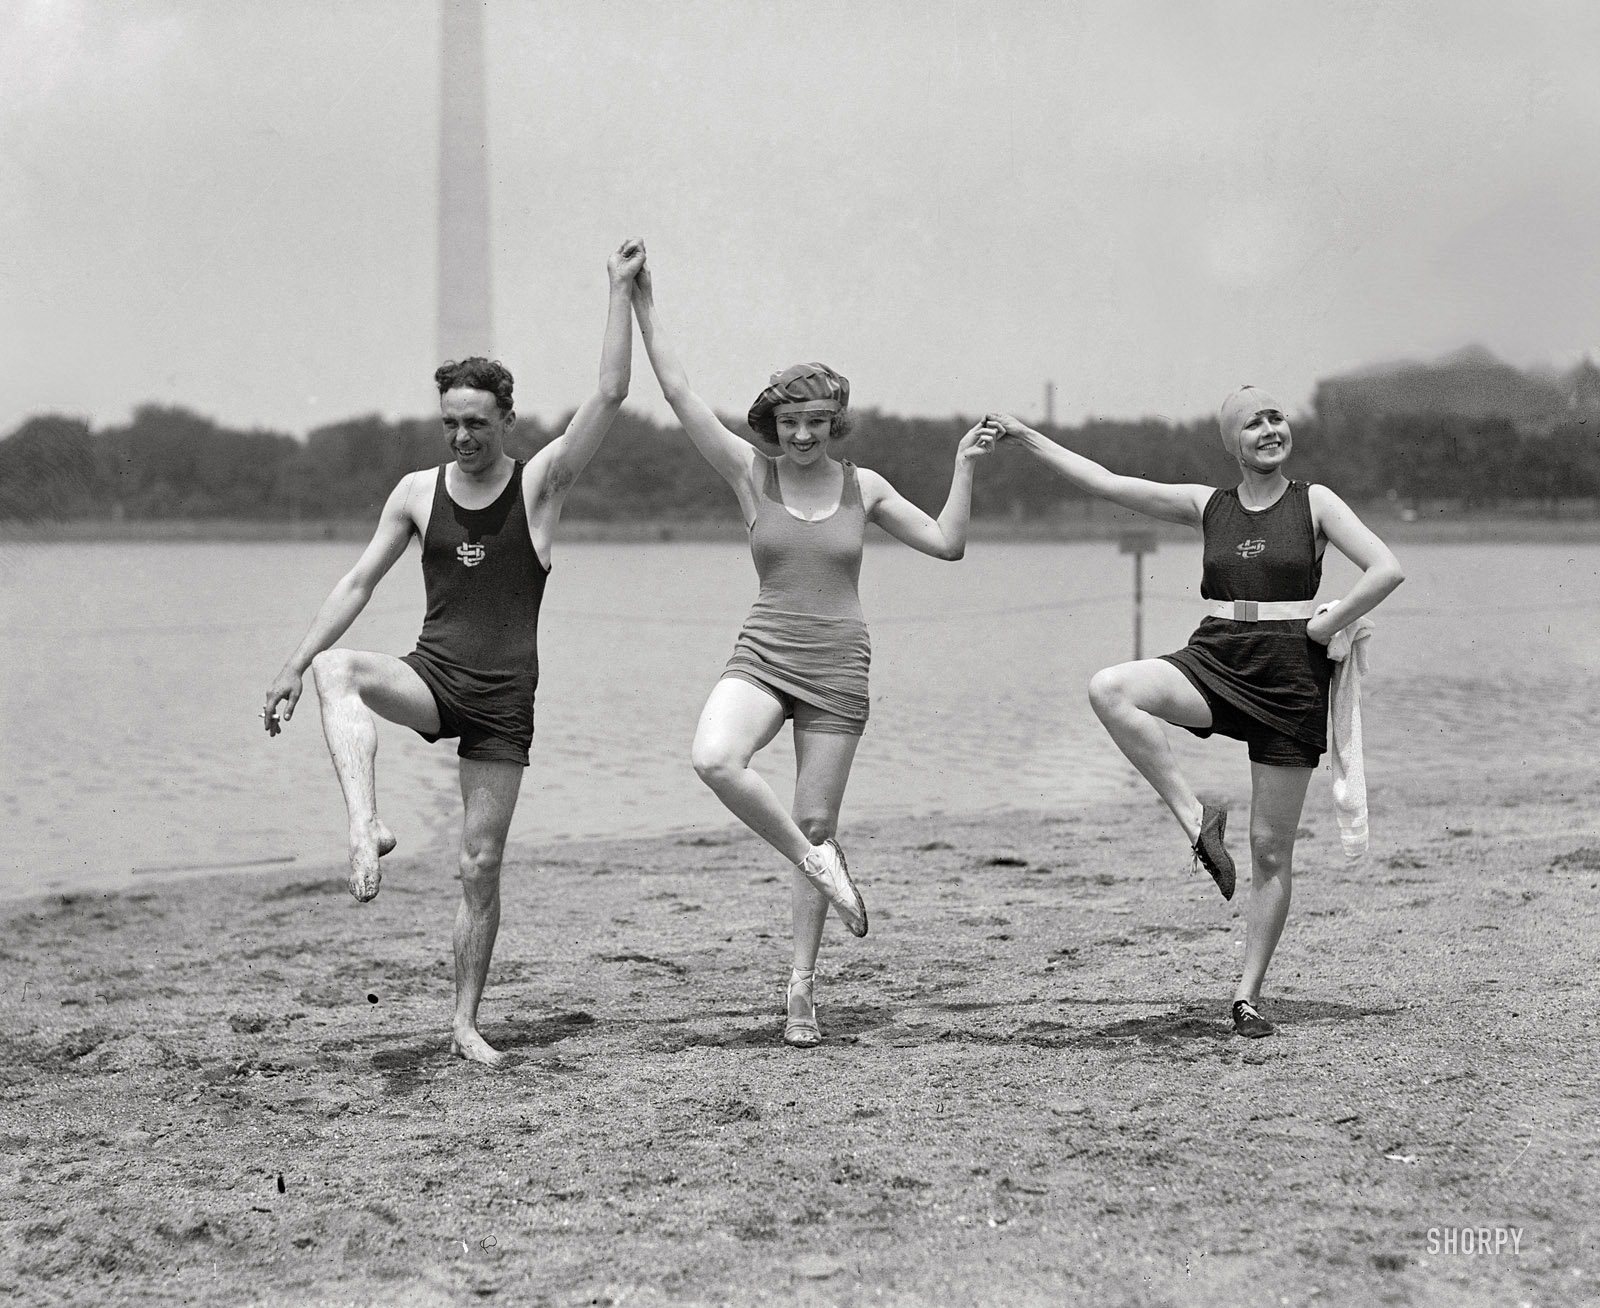 1922. Washington, D.C. The actress Kay Laurell again, five years before her premature curtain, with friends at the Potomac Tidal Basin. View full size.